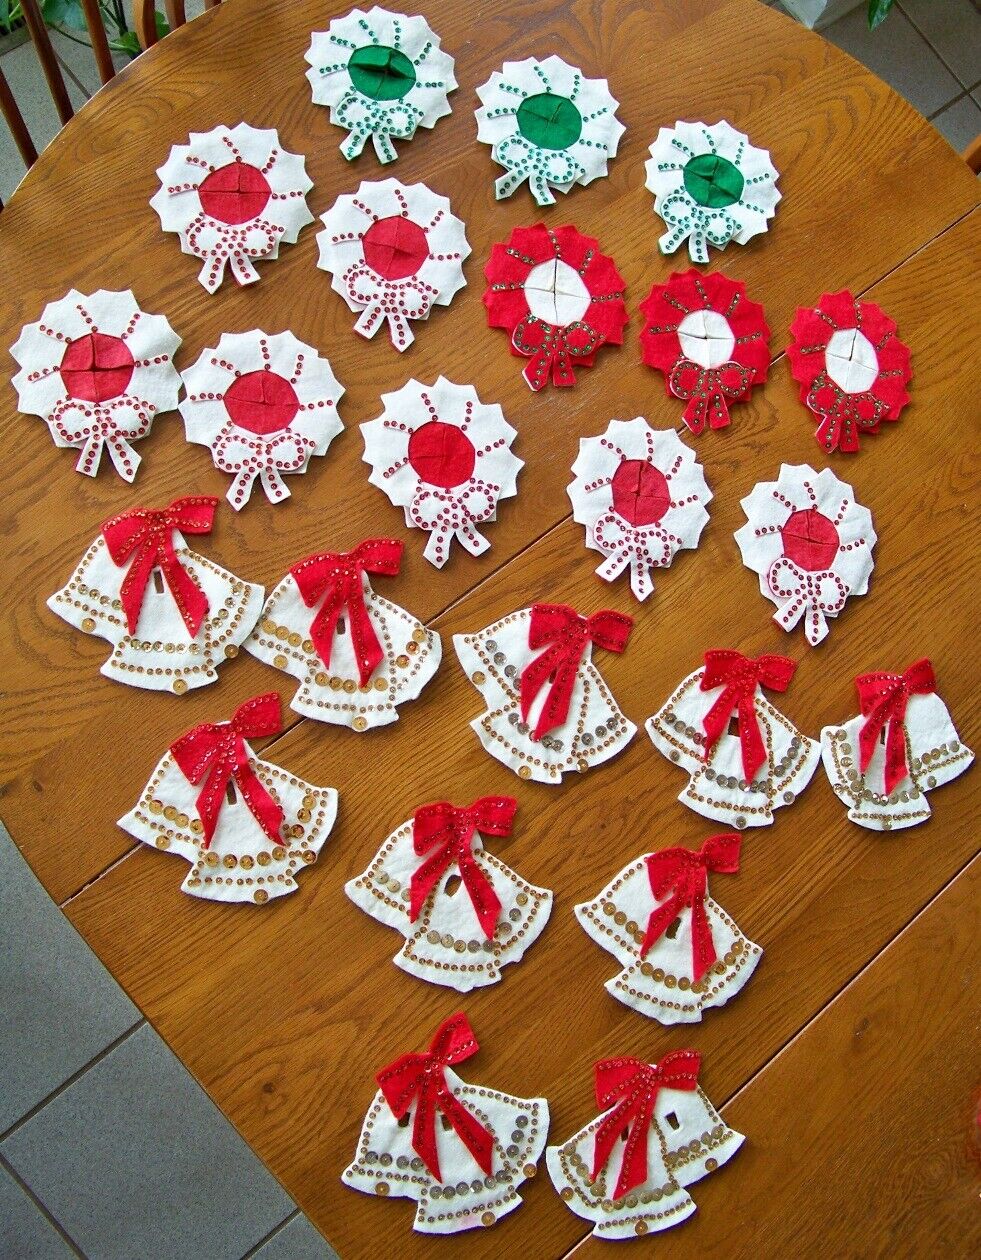 Lot of 13 Vintage Christmas Felt Doorknob Hangers and 10 Light Switch Covers